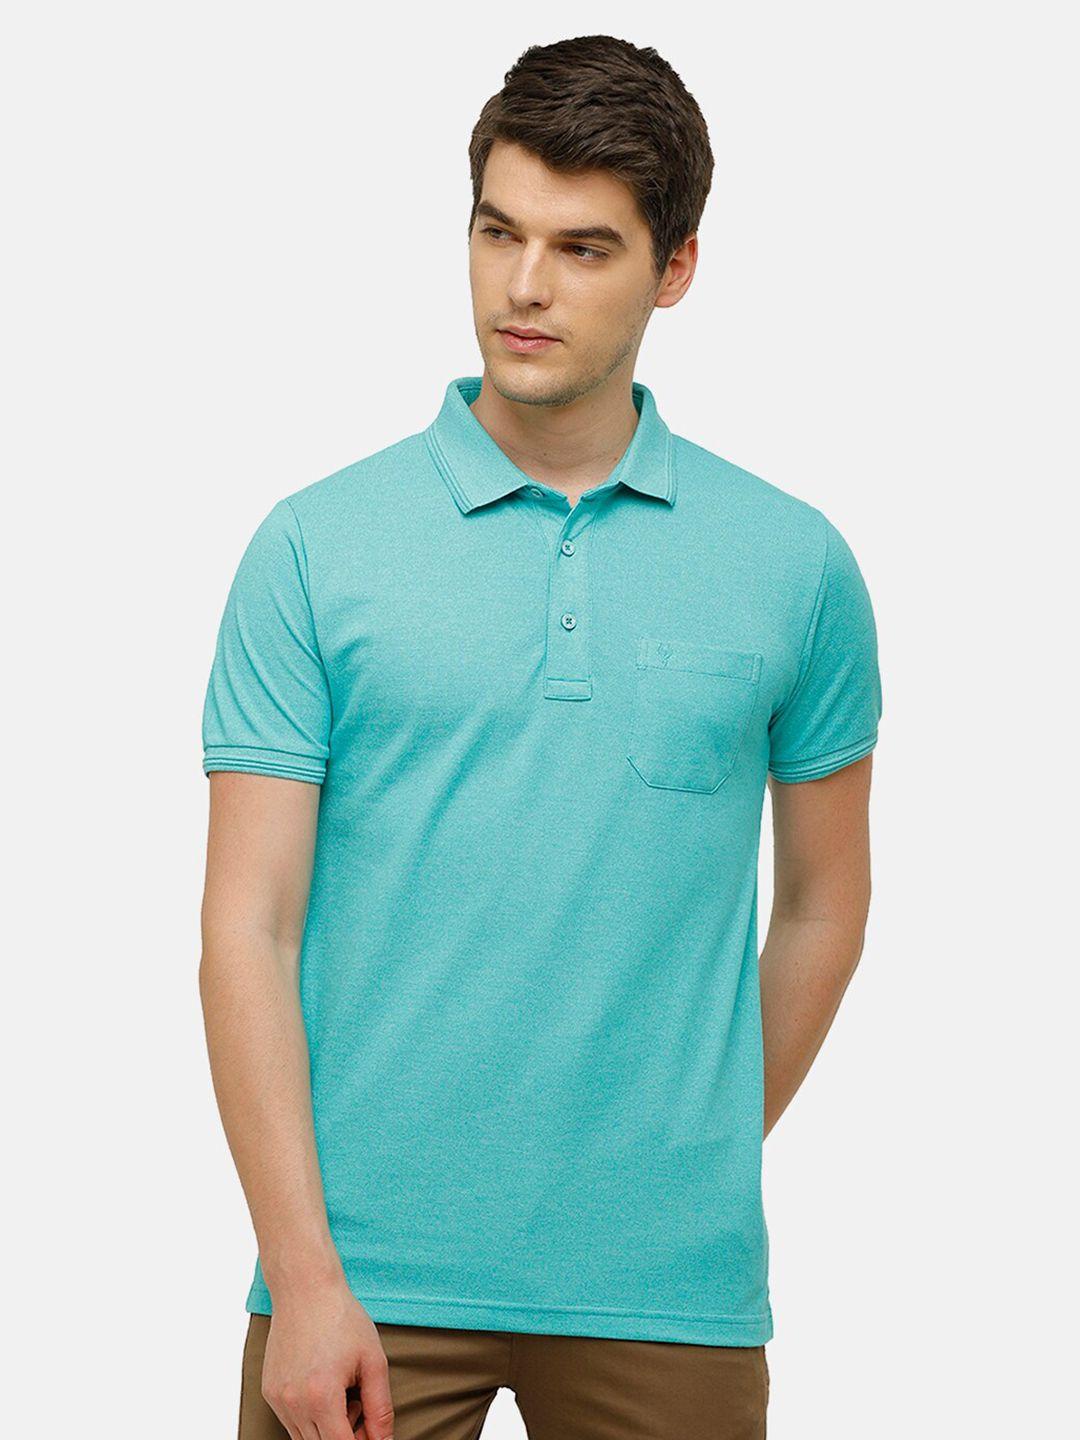 classic polo men turquoise blue polo collar slim fit t-shirt